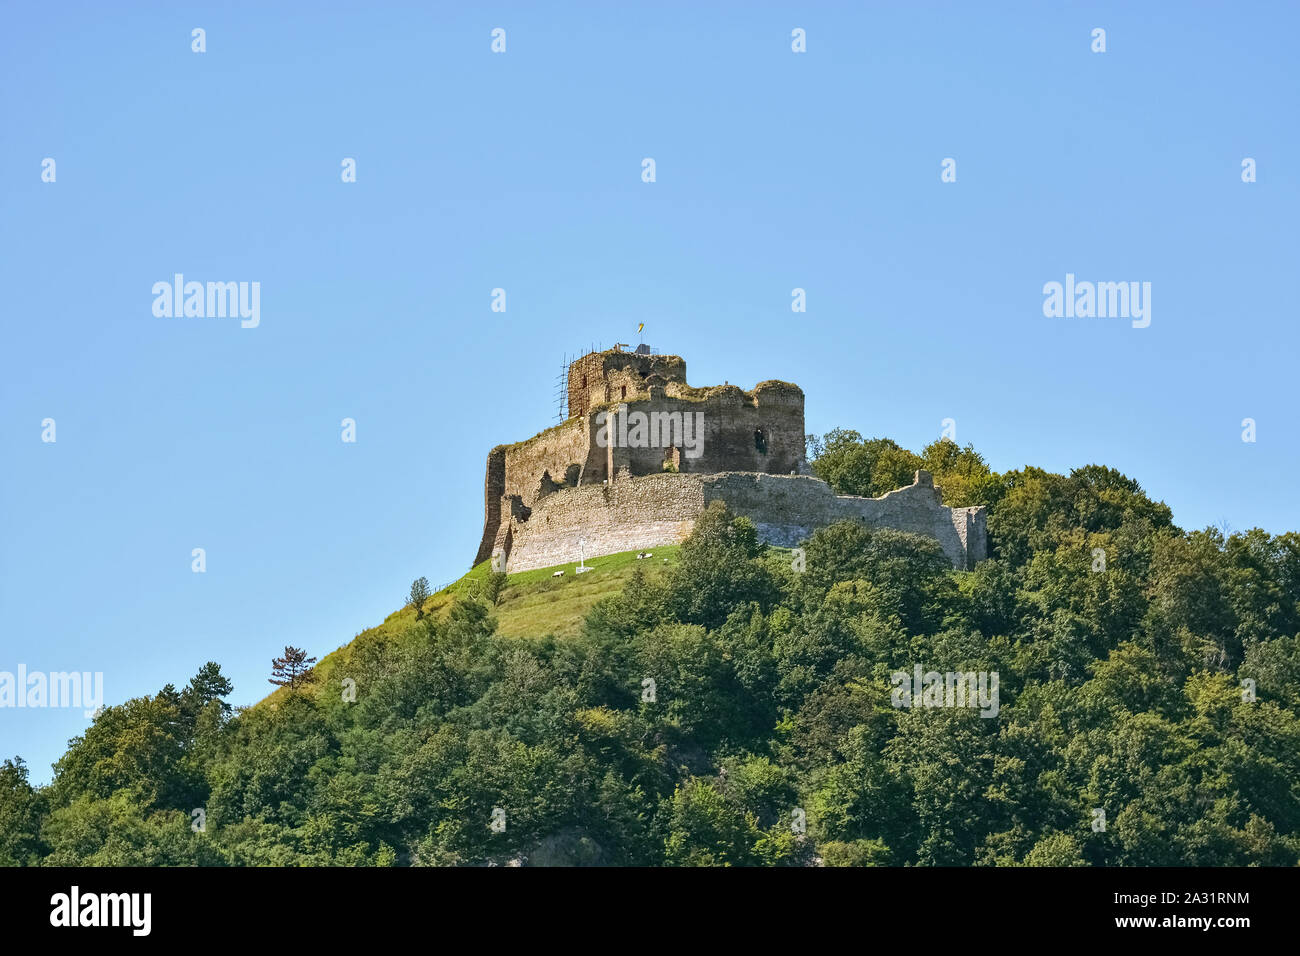 Kapusan castle ruins, on top of a forested mountain, with a flag on a tower against a clear blue sky in Slovakia, near the town of Presov. Stock Photo